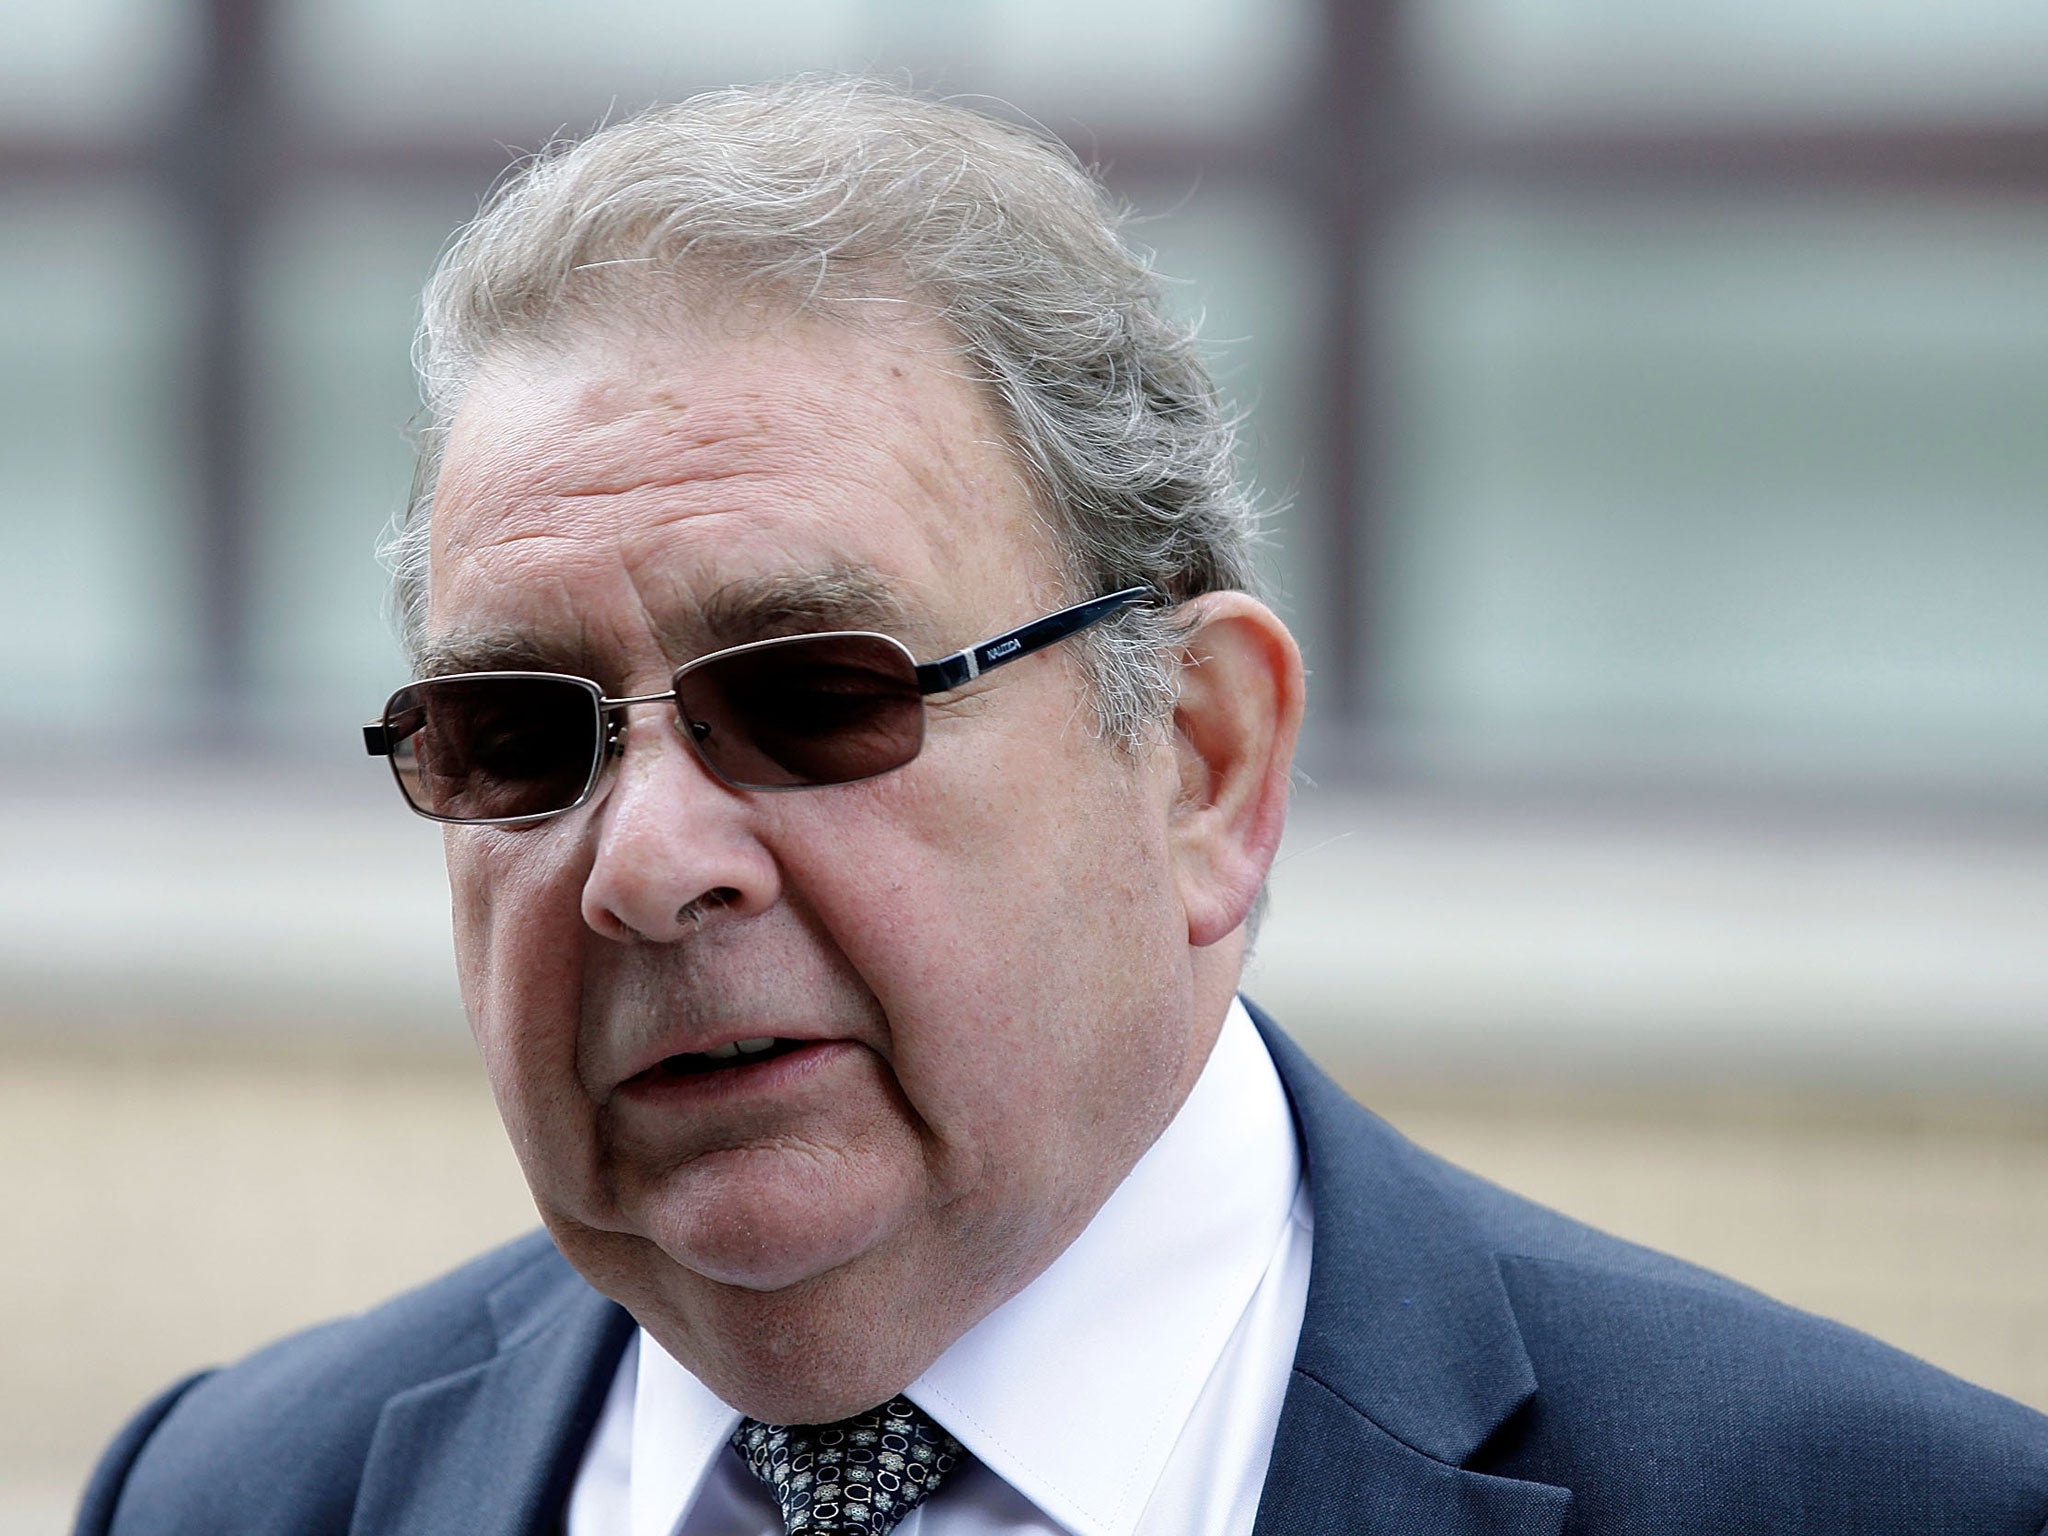 Lord Hanningfield is well-known as the MP who fiddled his expenses